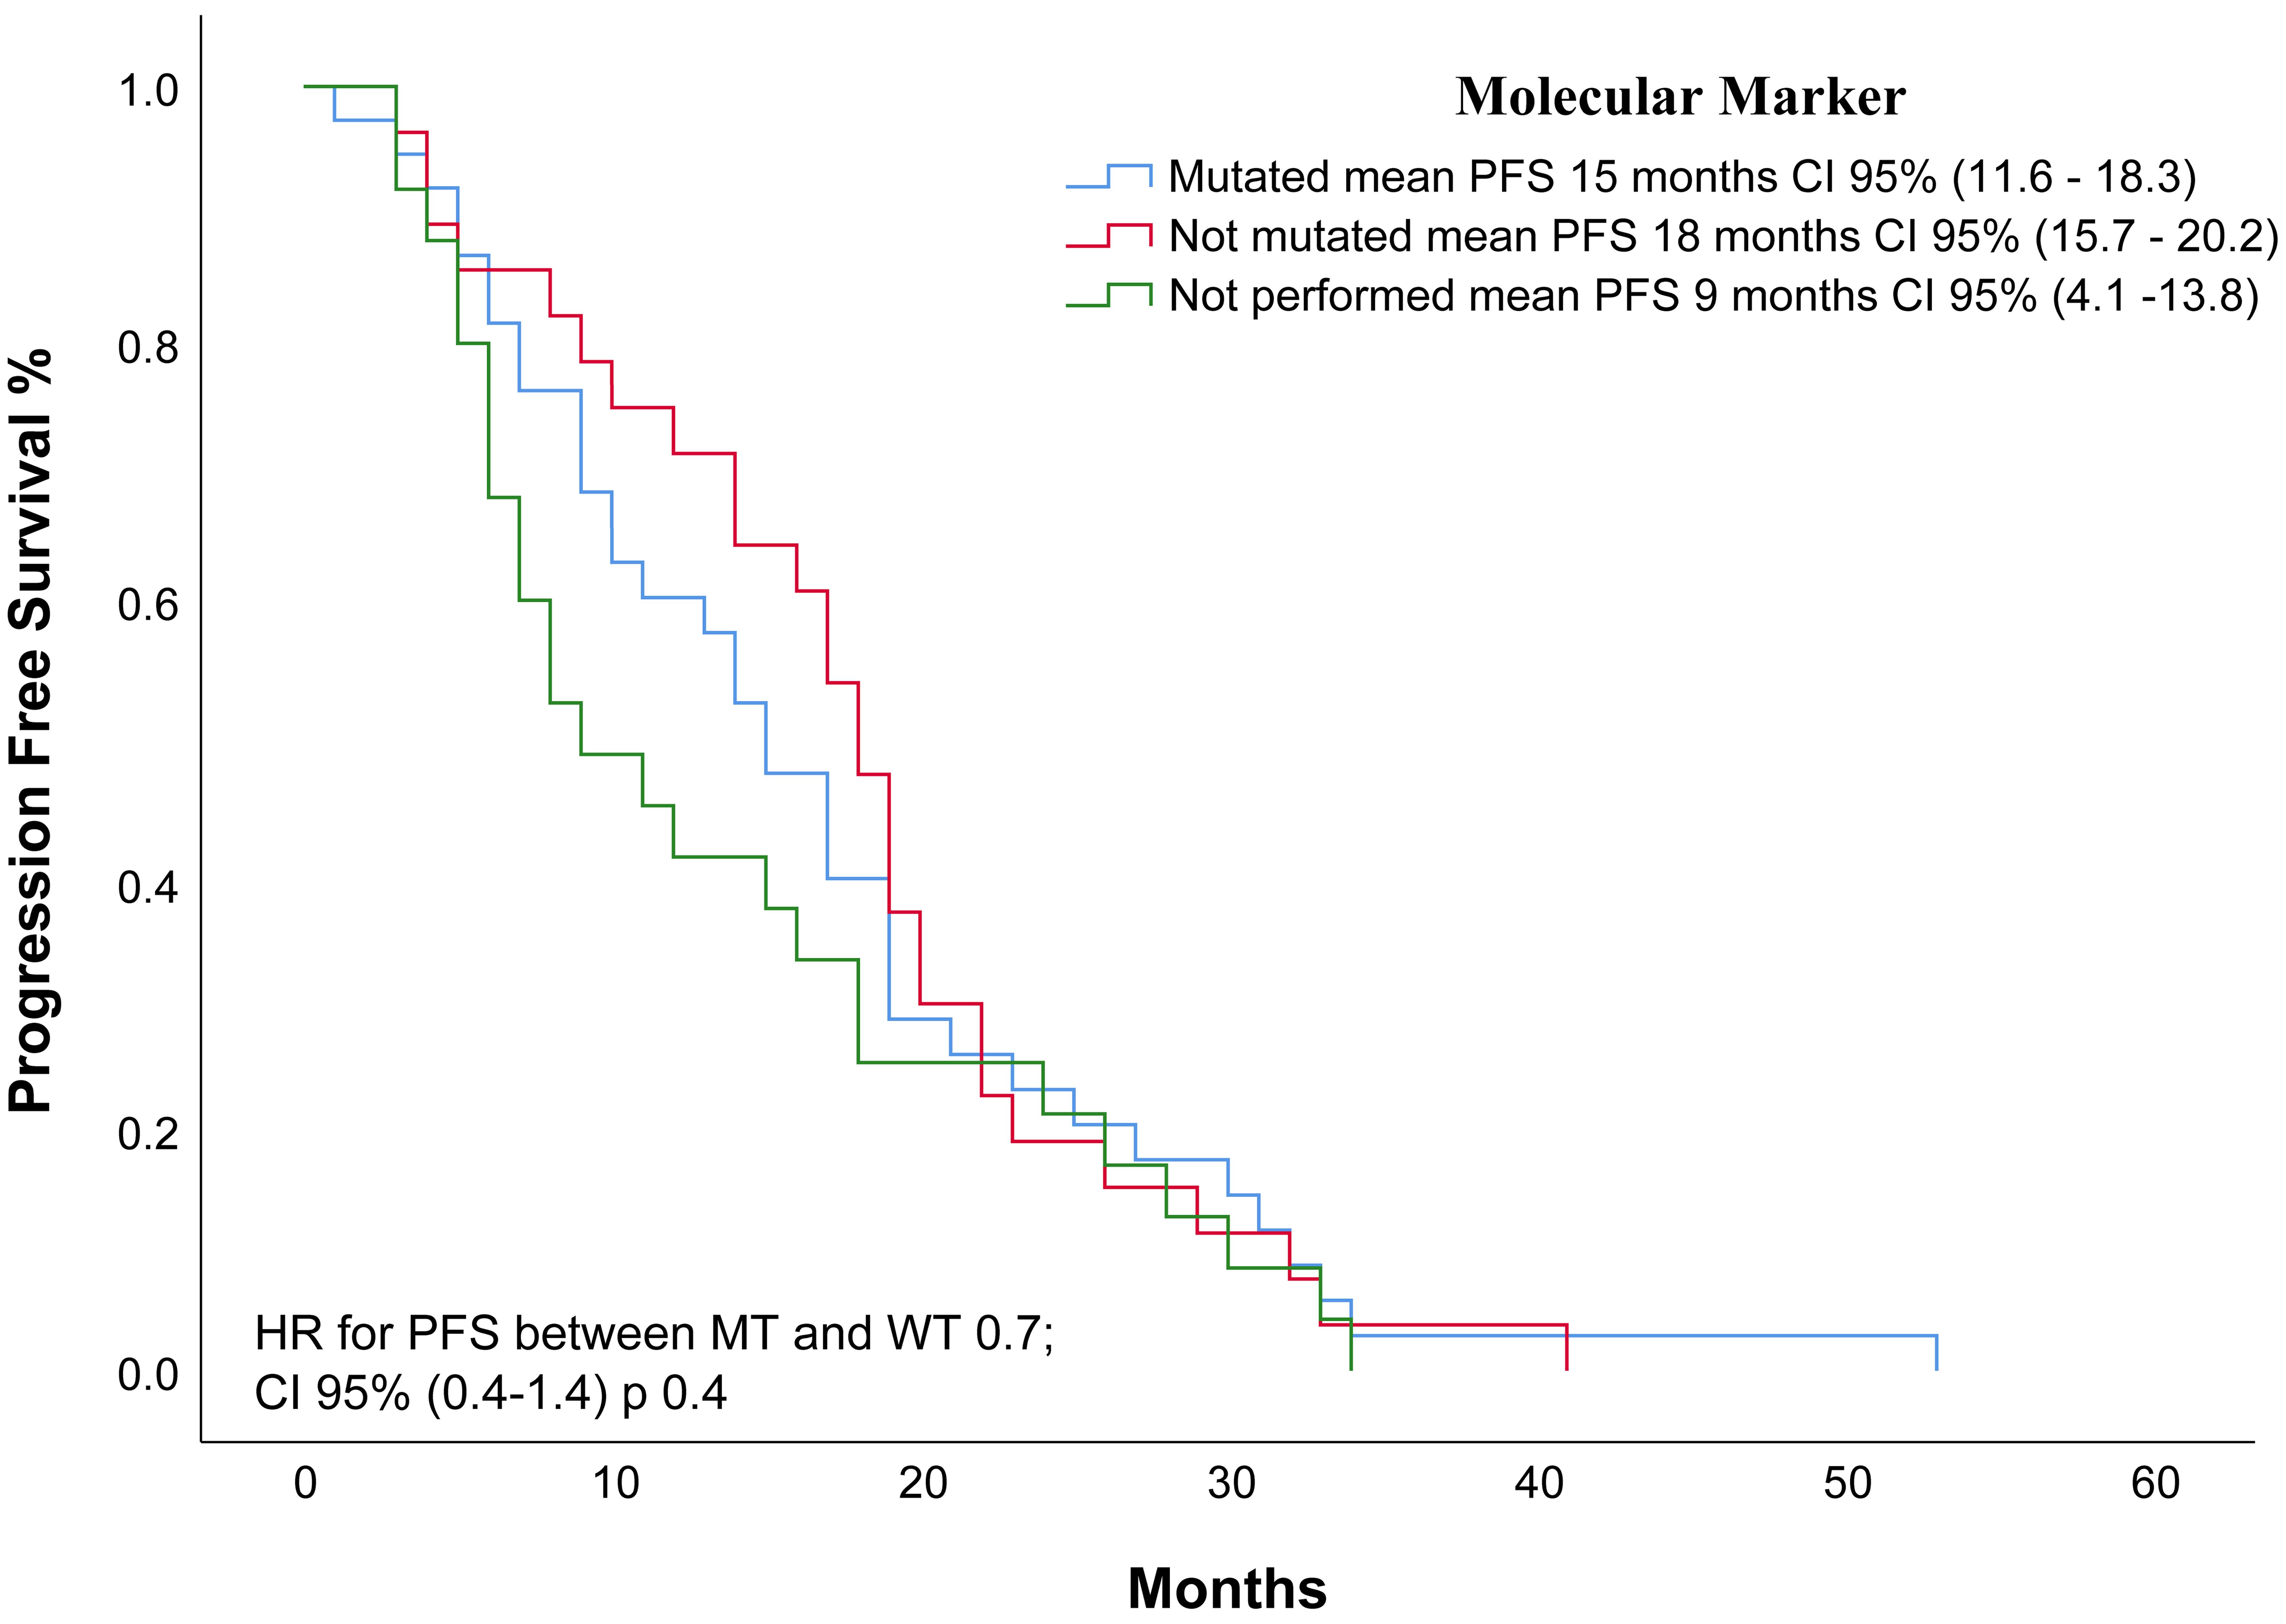 Kaplan-Meier progression-free survival (PFS) in 177 patients with metastatic CRC at the HEEE according to molecular markers.